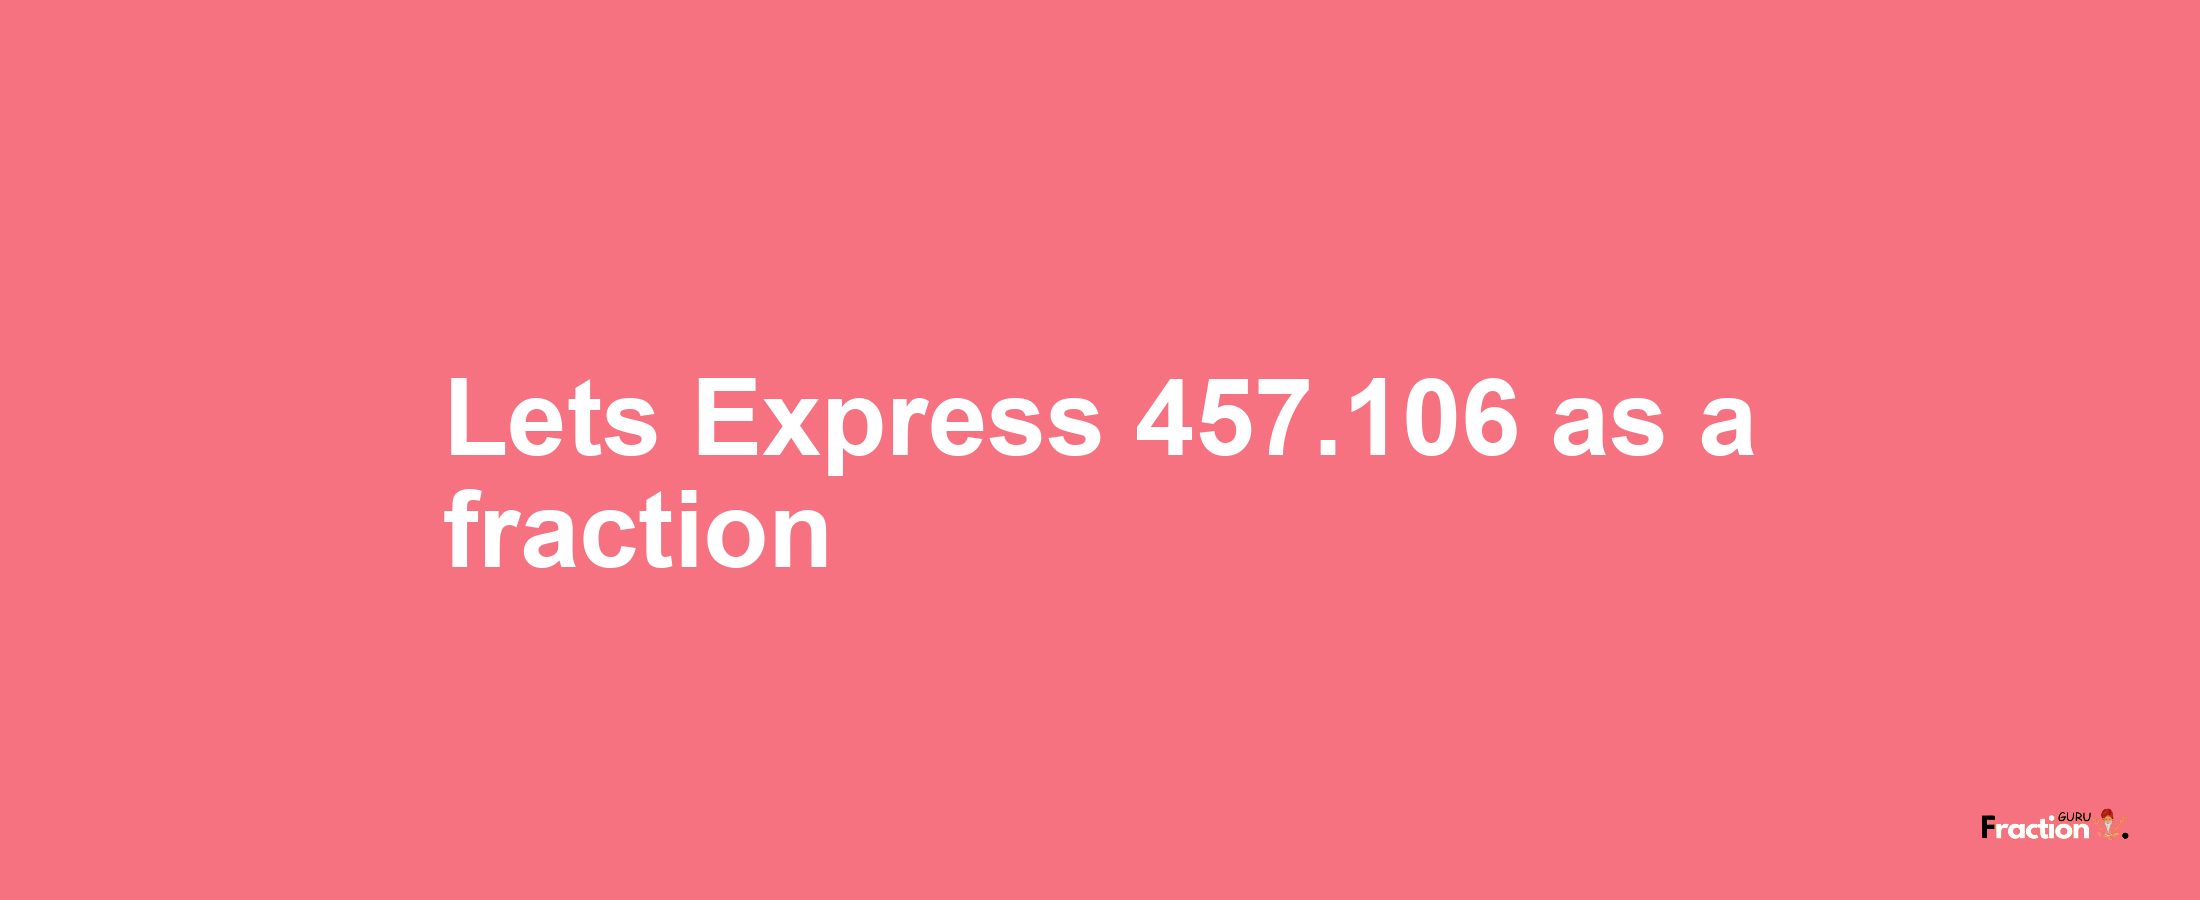 Lets Express 457.106 as afraction